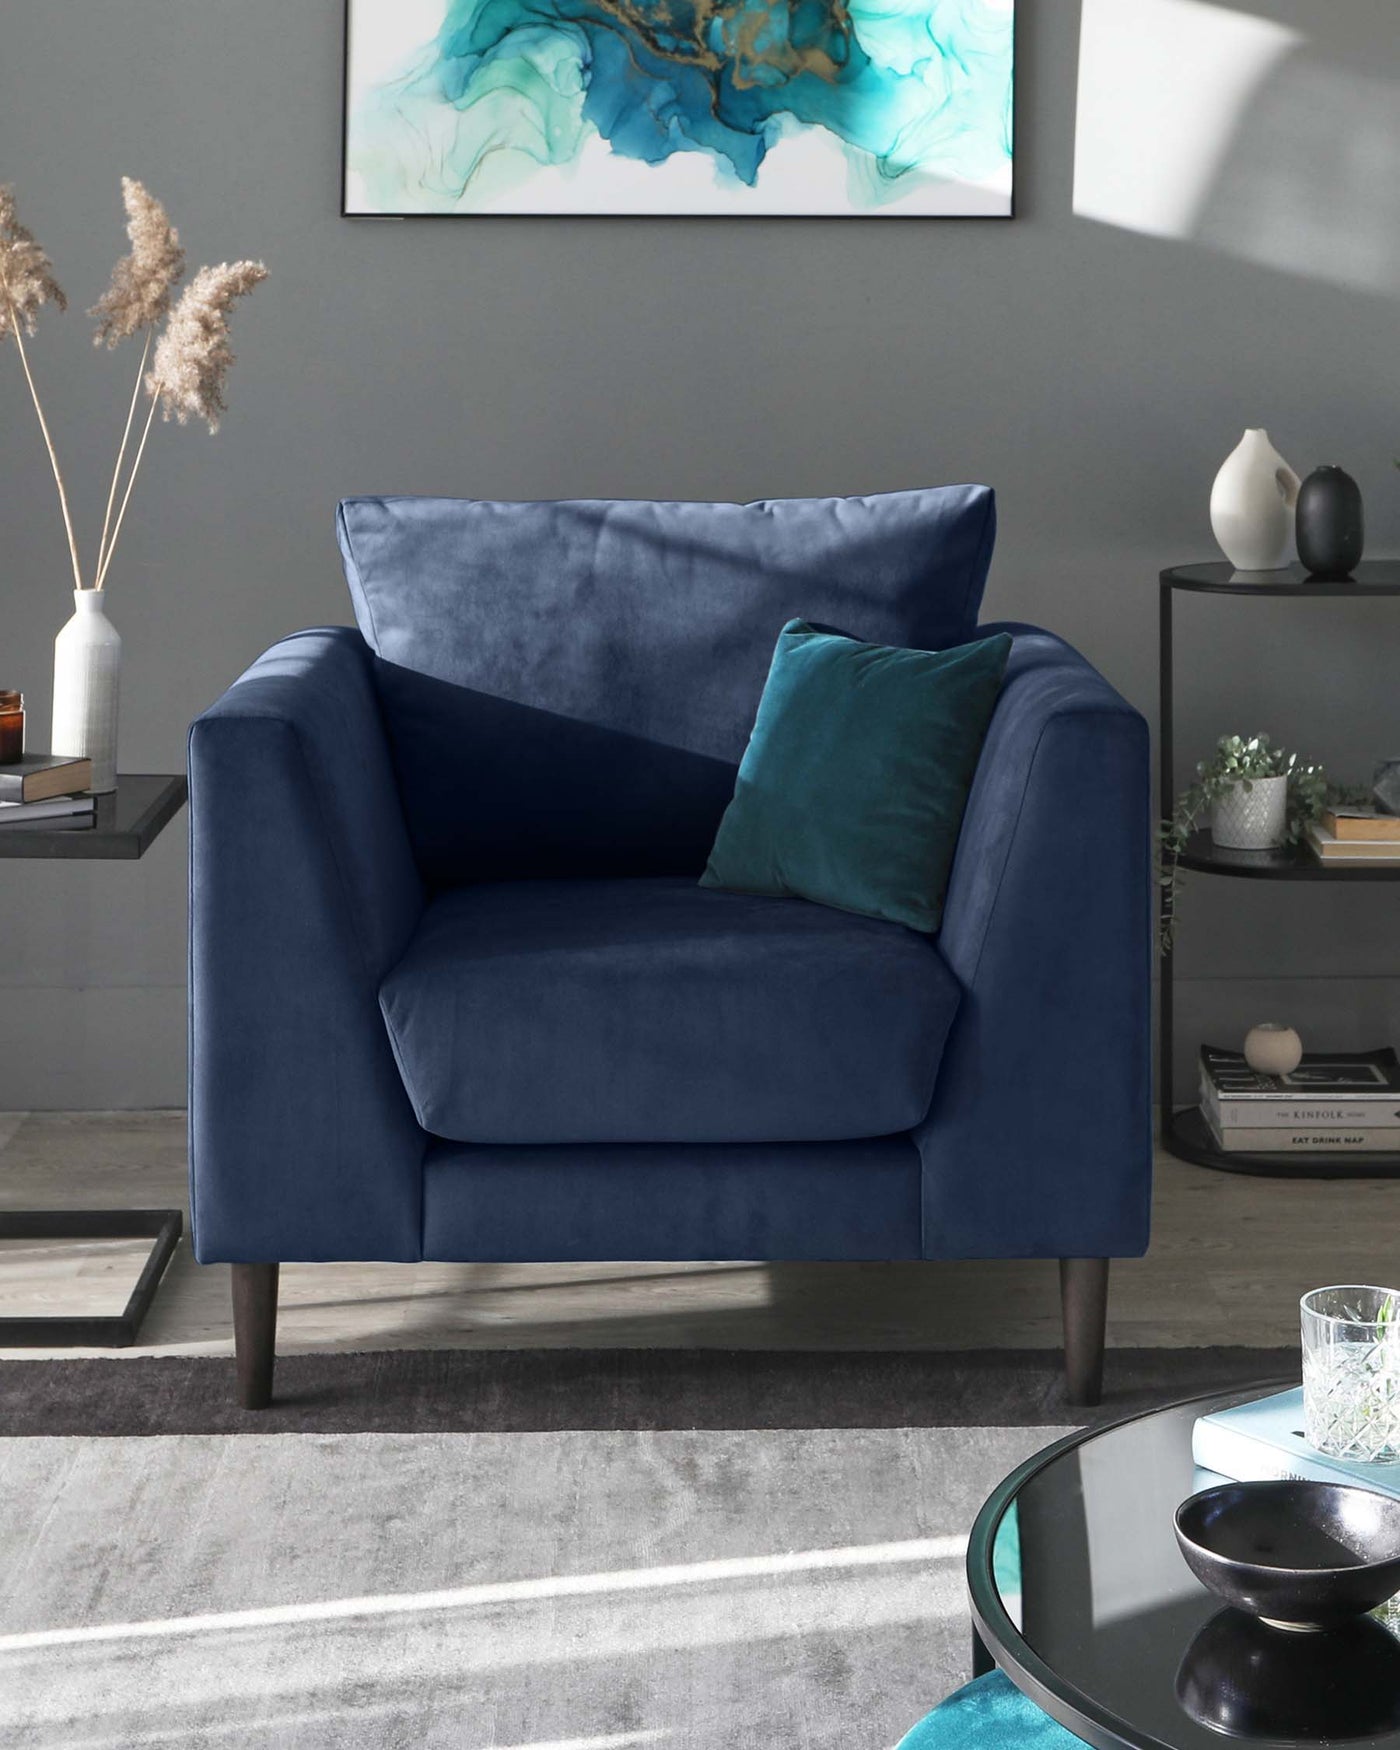 A luxurious navy blue velvet armchair with a plush seat and back cushion, complemented by a dark teal throw pillow. The chair rests on tapered wooden legs and is positioned on a textured grey area rug. In the background, there's a sleek circular glass-top side table with black framing, a modern white vase with pampas grass, an abstract wall art with blue and green hues, and decorative items placed atop a grey sideboard to complete this contemporary living space.